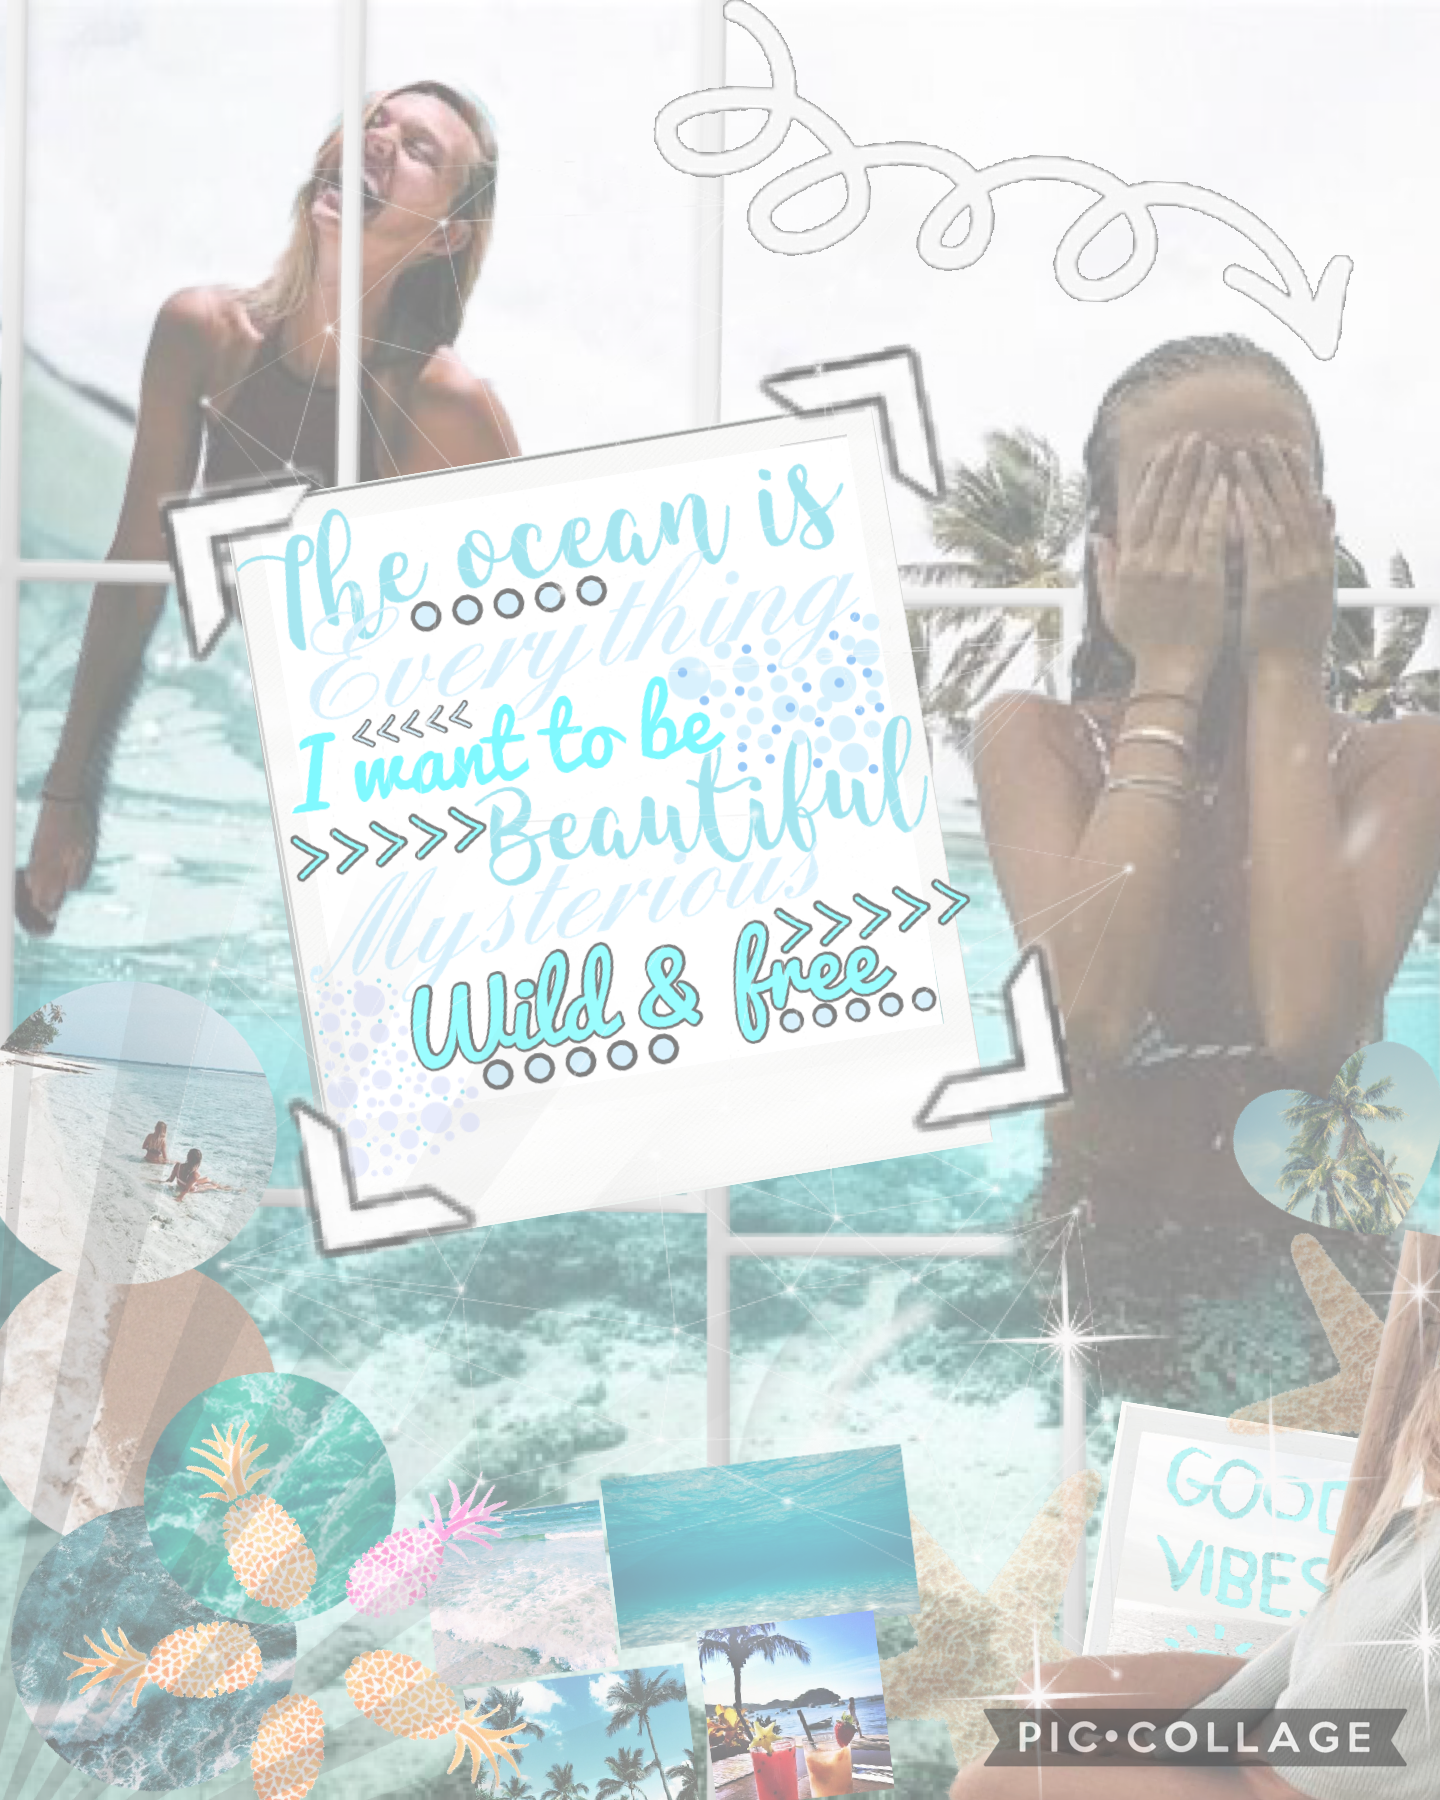 💦3~18~21💦
1st collage!🌊
What do you guys think?
Comment down below what  you guys want me to post!:)
Have a good day!